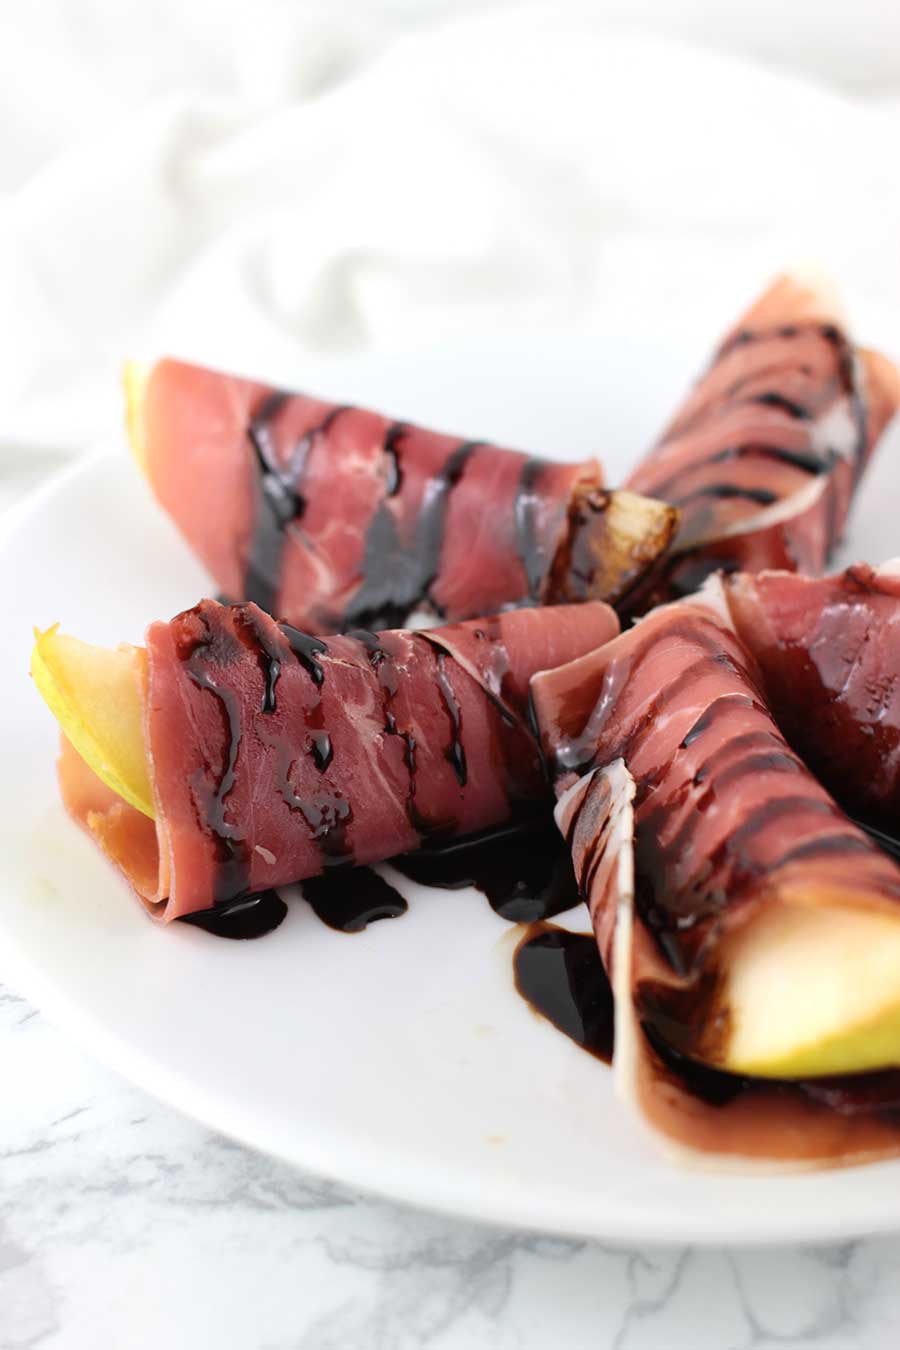 Balsamic-Glazed Prosciutto-Wrapped Pears